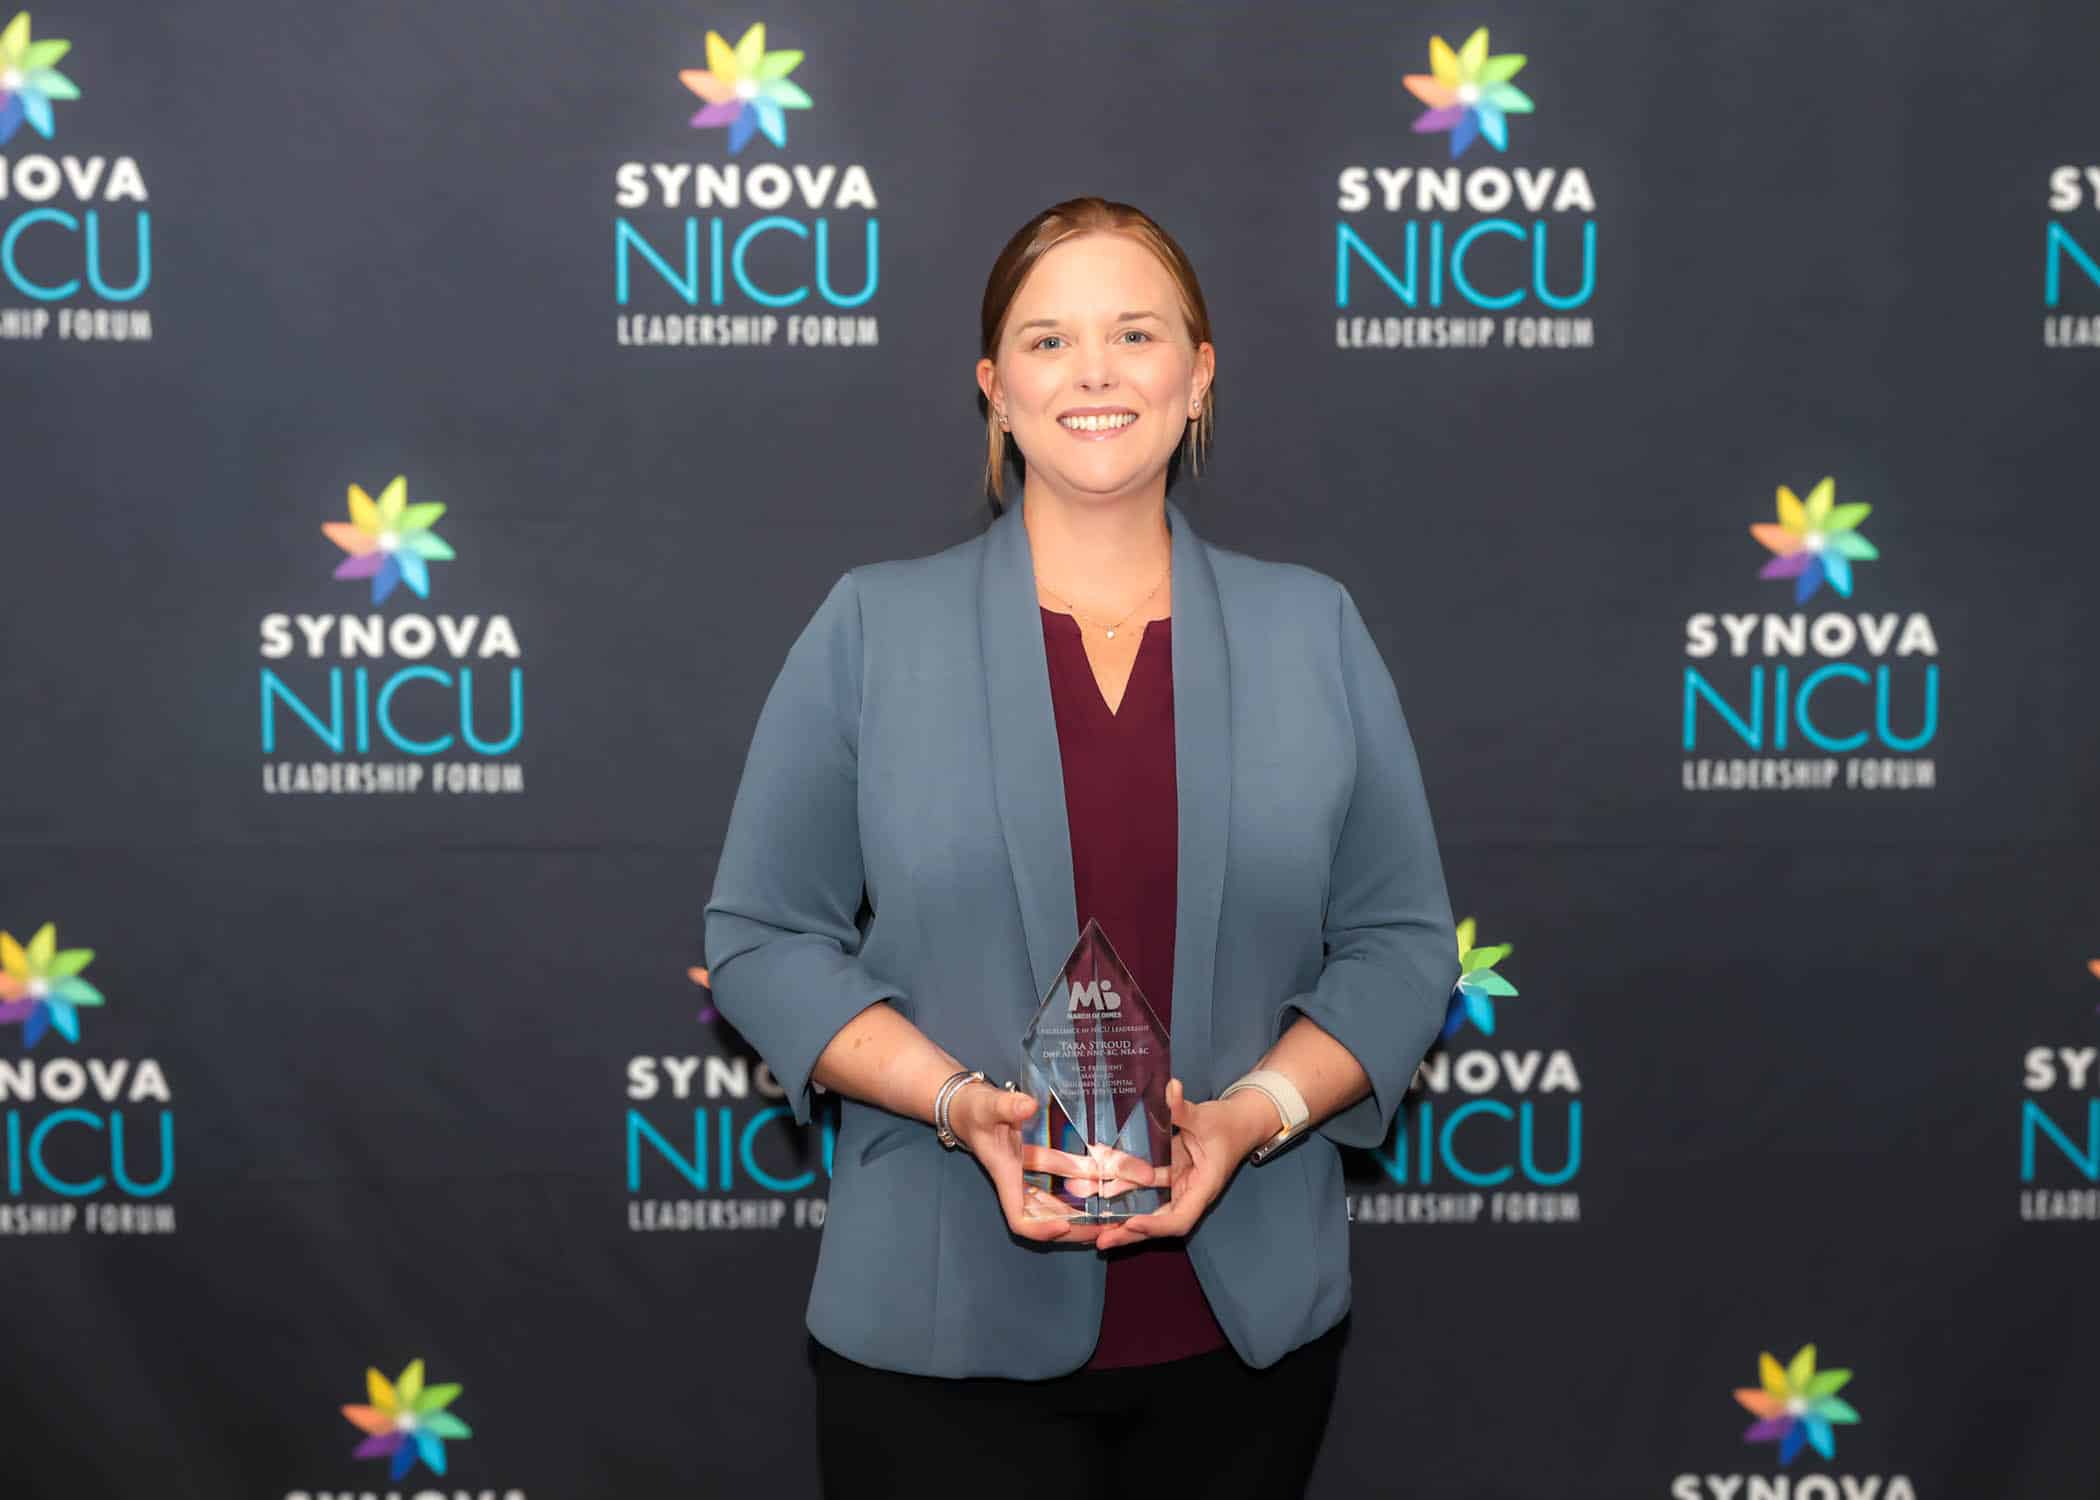 Tara Stroud poses for a photo after she was awarded the March of Dimes Excellence in Neonatal Intensive Care Unit (NICU) Leadership Award.